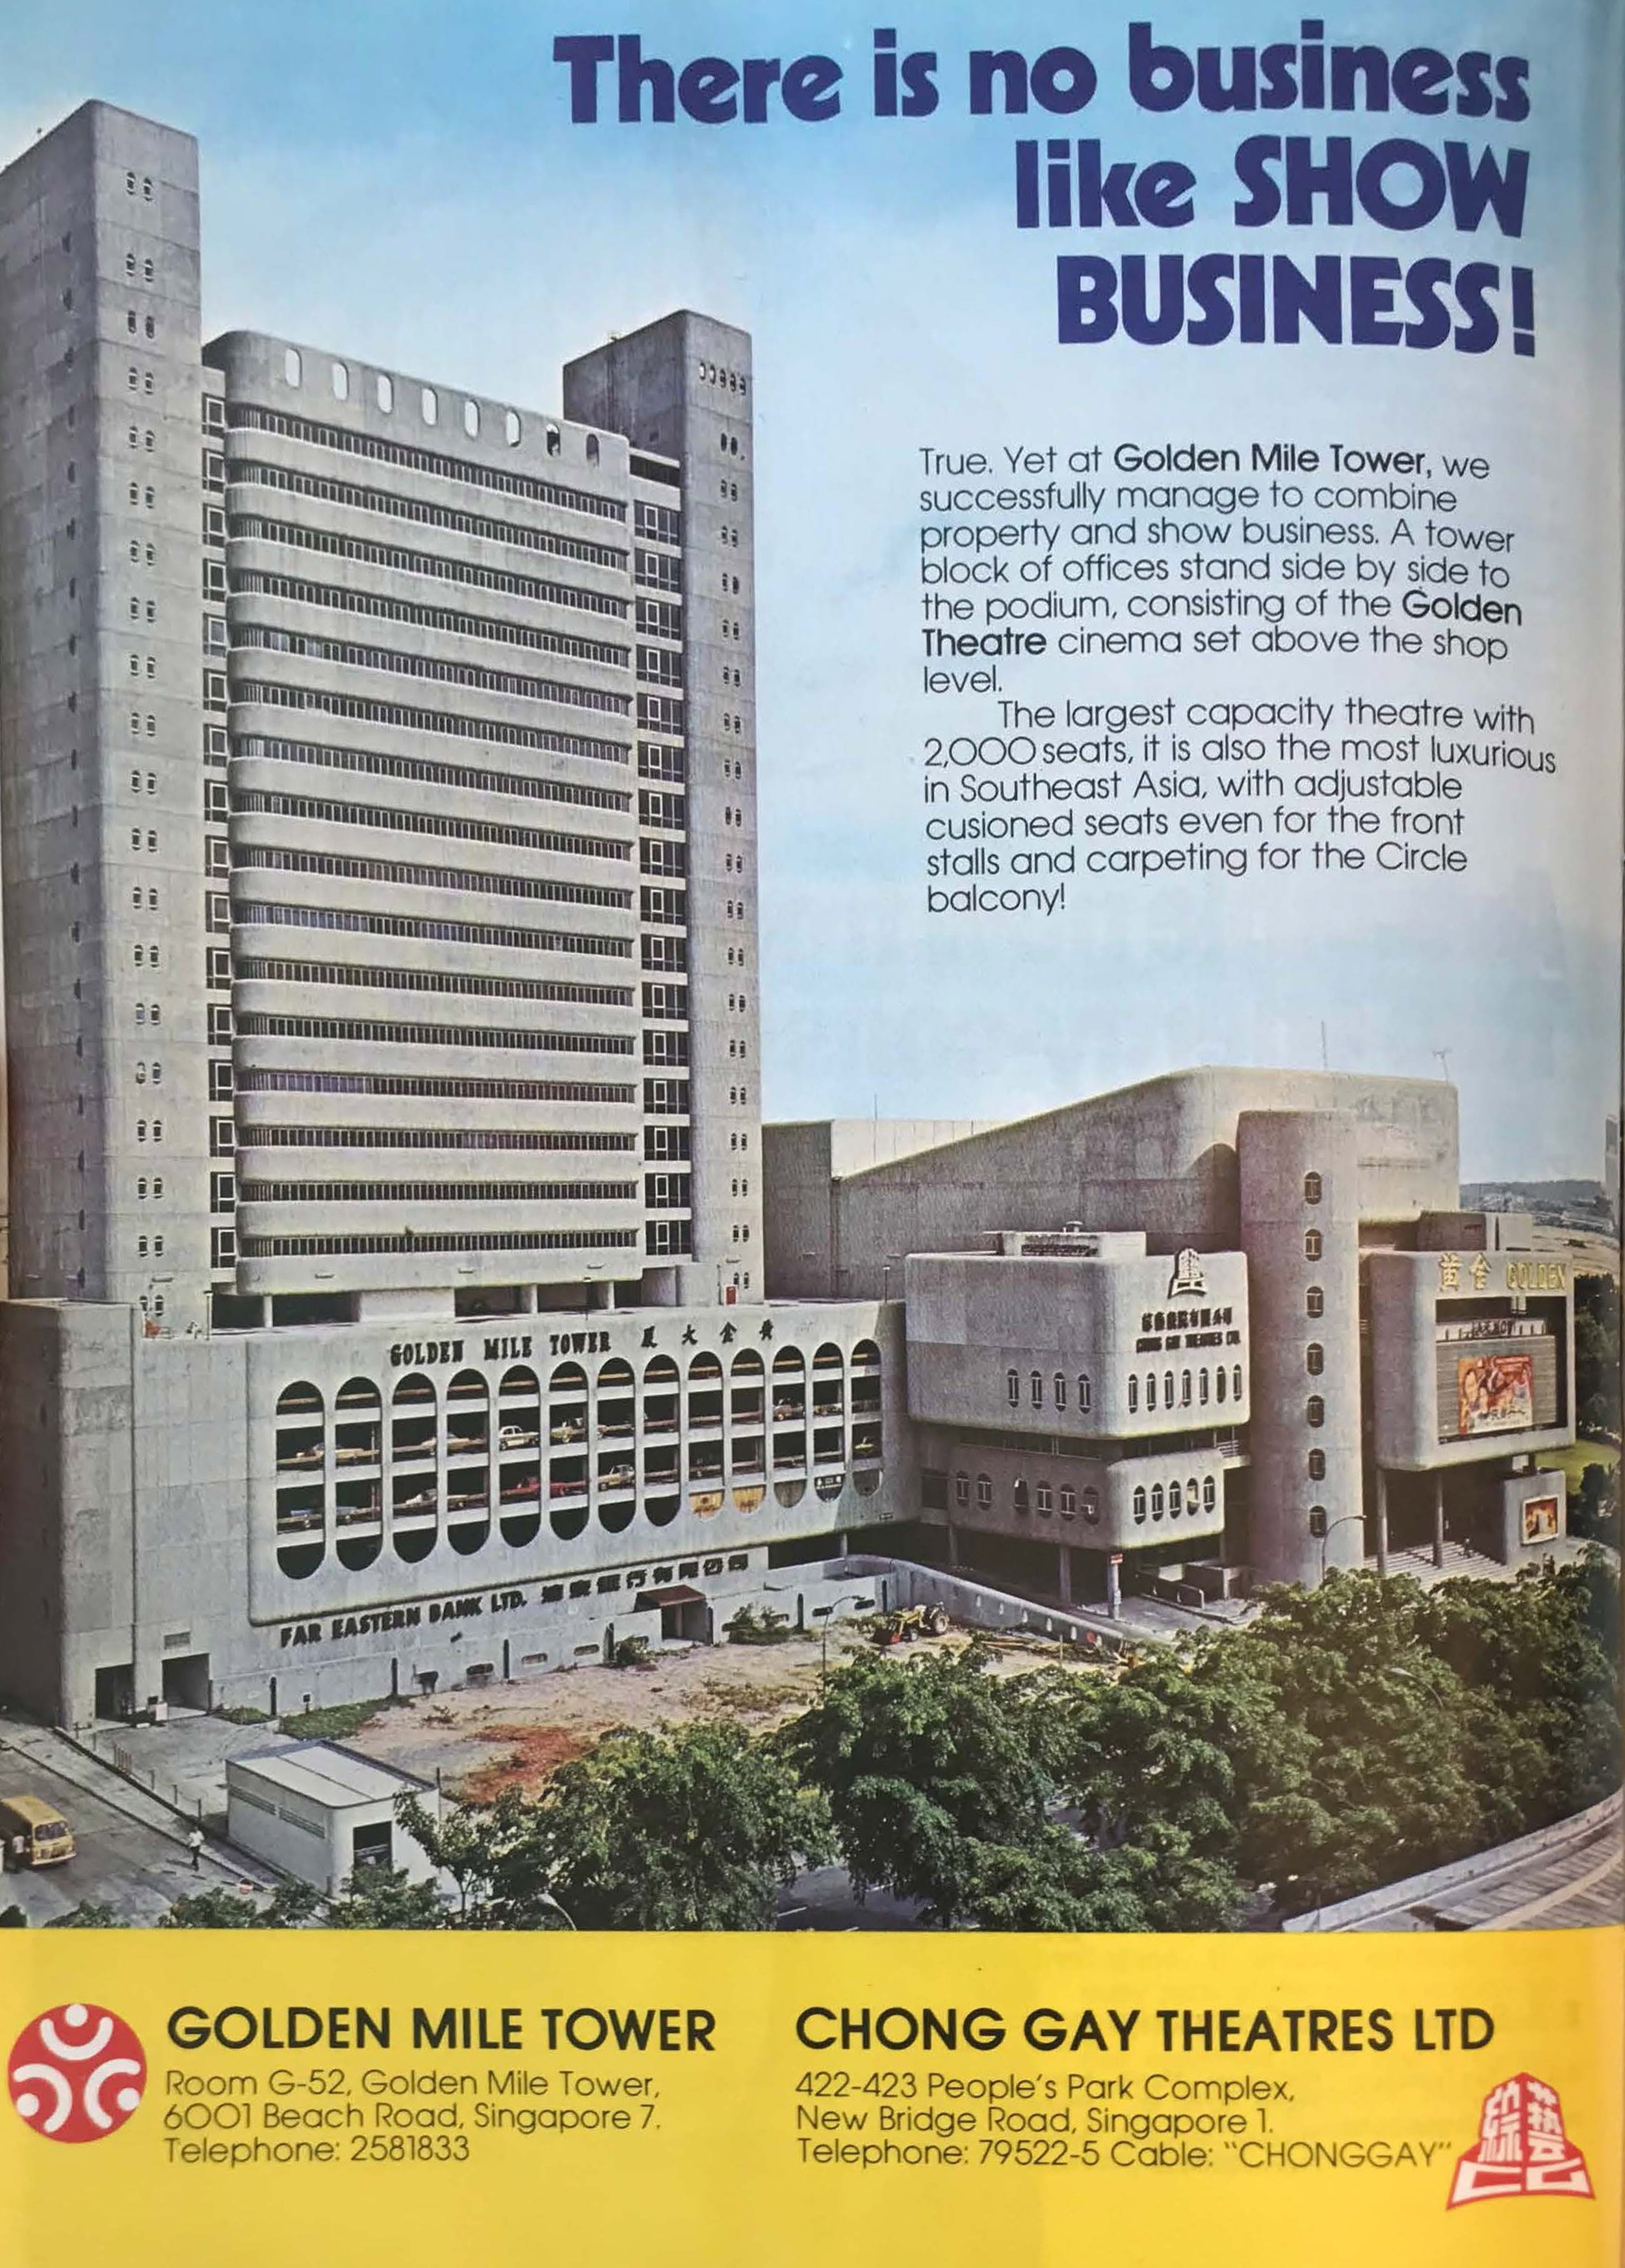 Exterior view of the newly completed Golden Mile Tower. Source: Building Materials &amp; Equipment, June (1976), p. 16. 